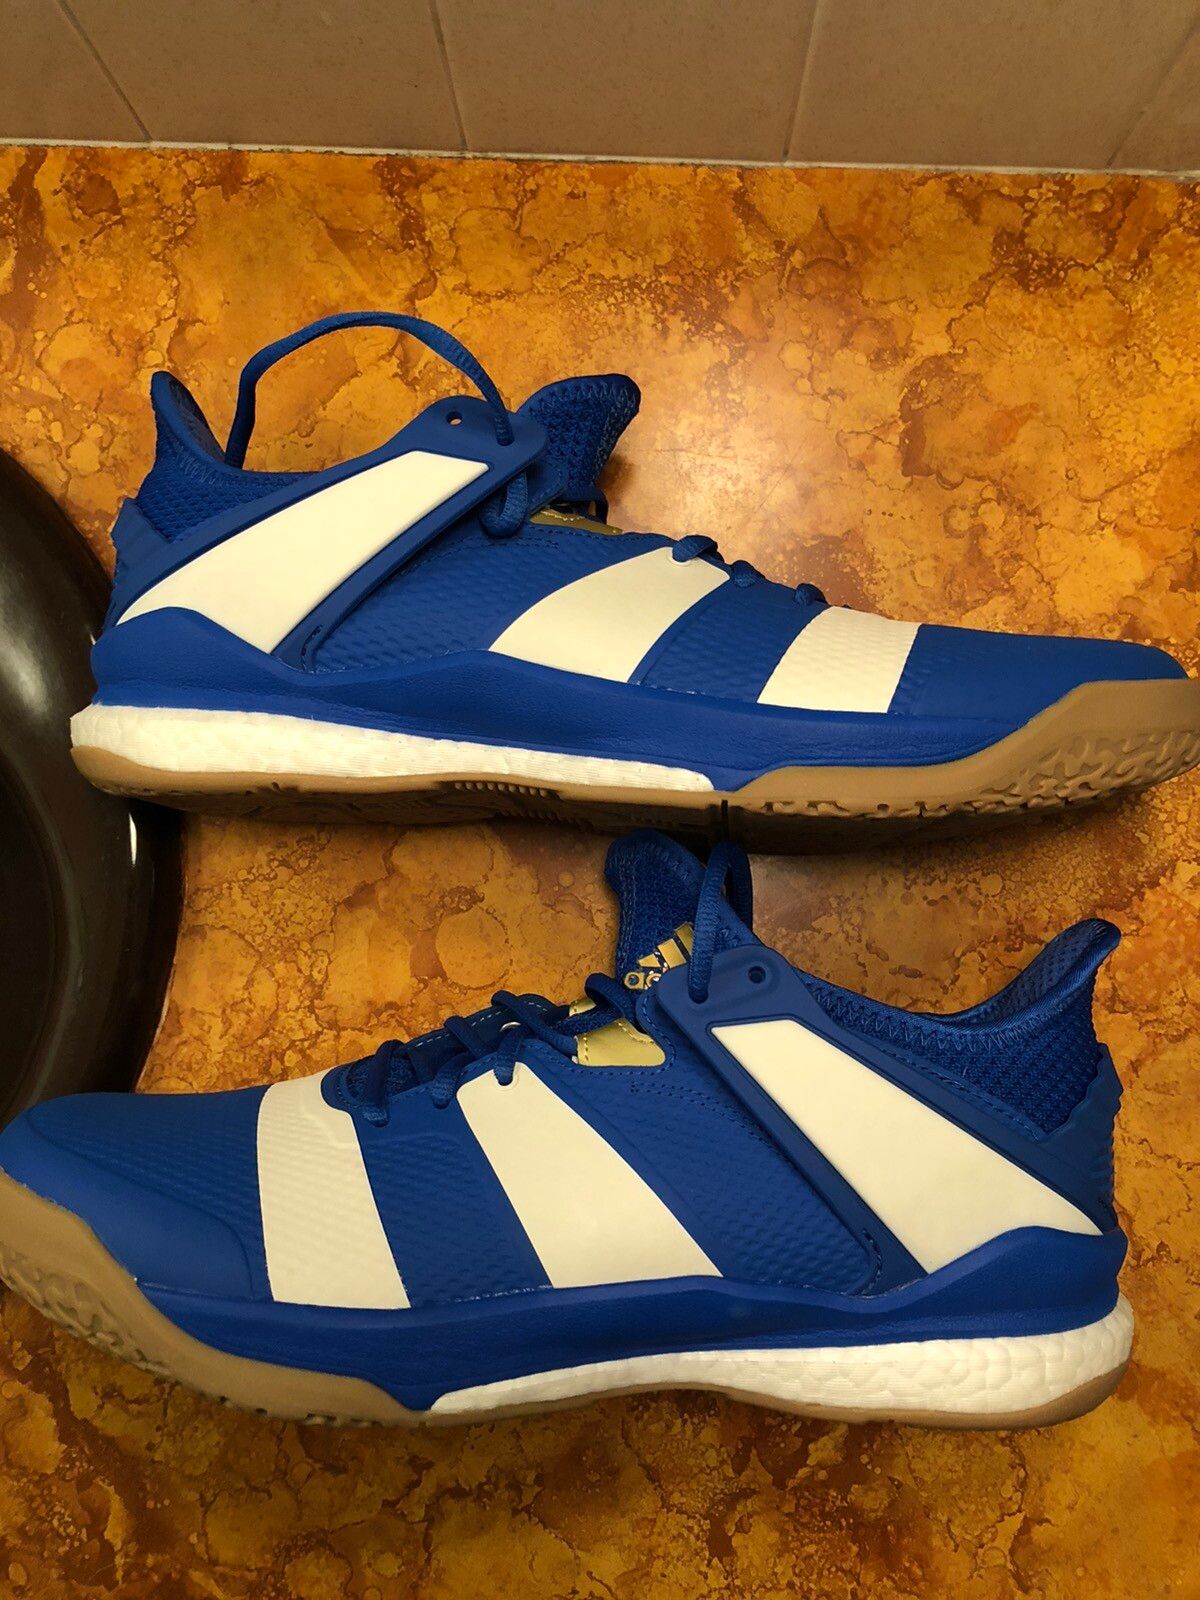 Adidas adidas Stabil X Men's Volleyball Shoes Blue/Gold Size US 12.5 / EU 45-46 - 5 Thumbnail